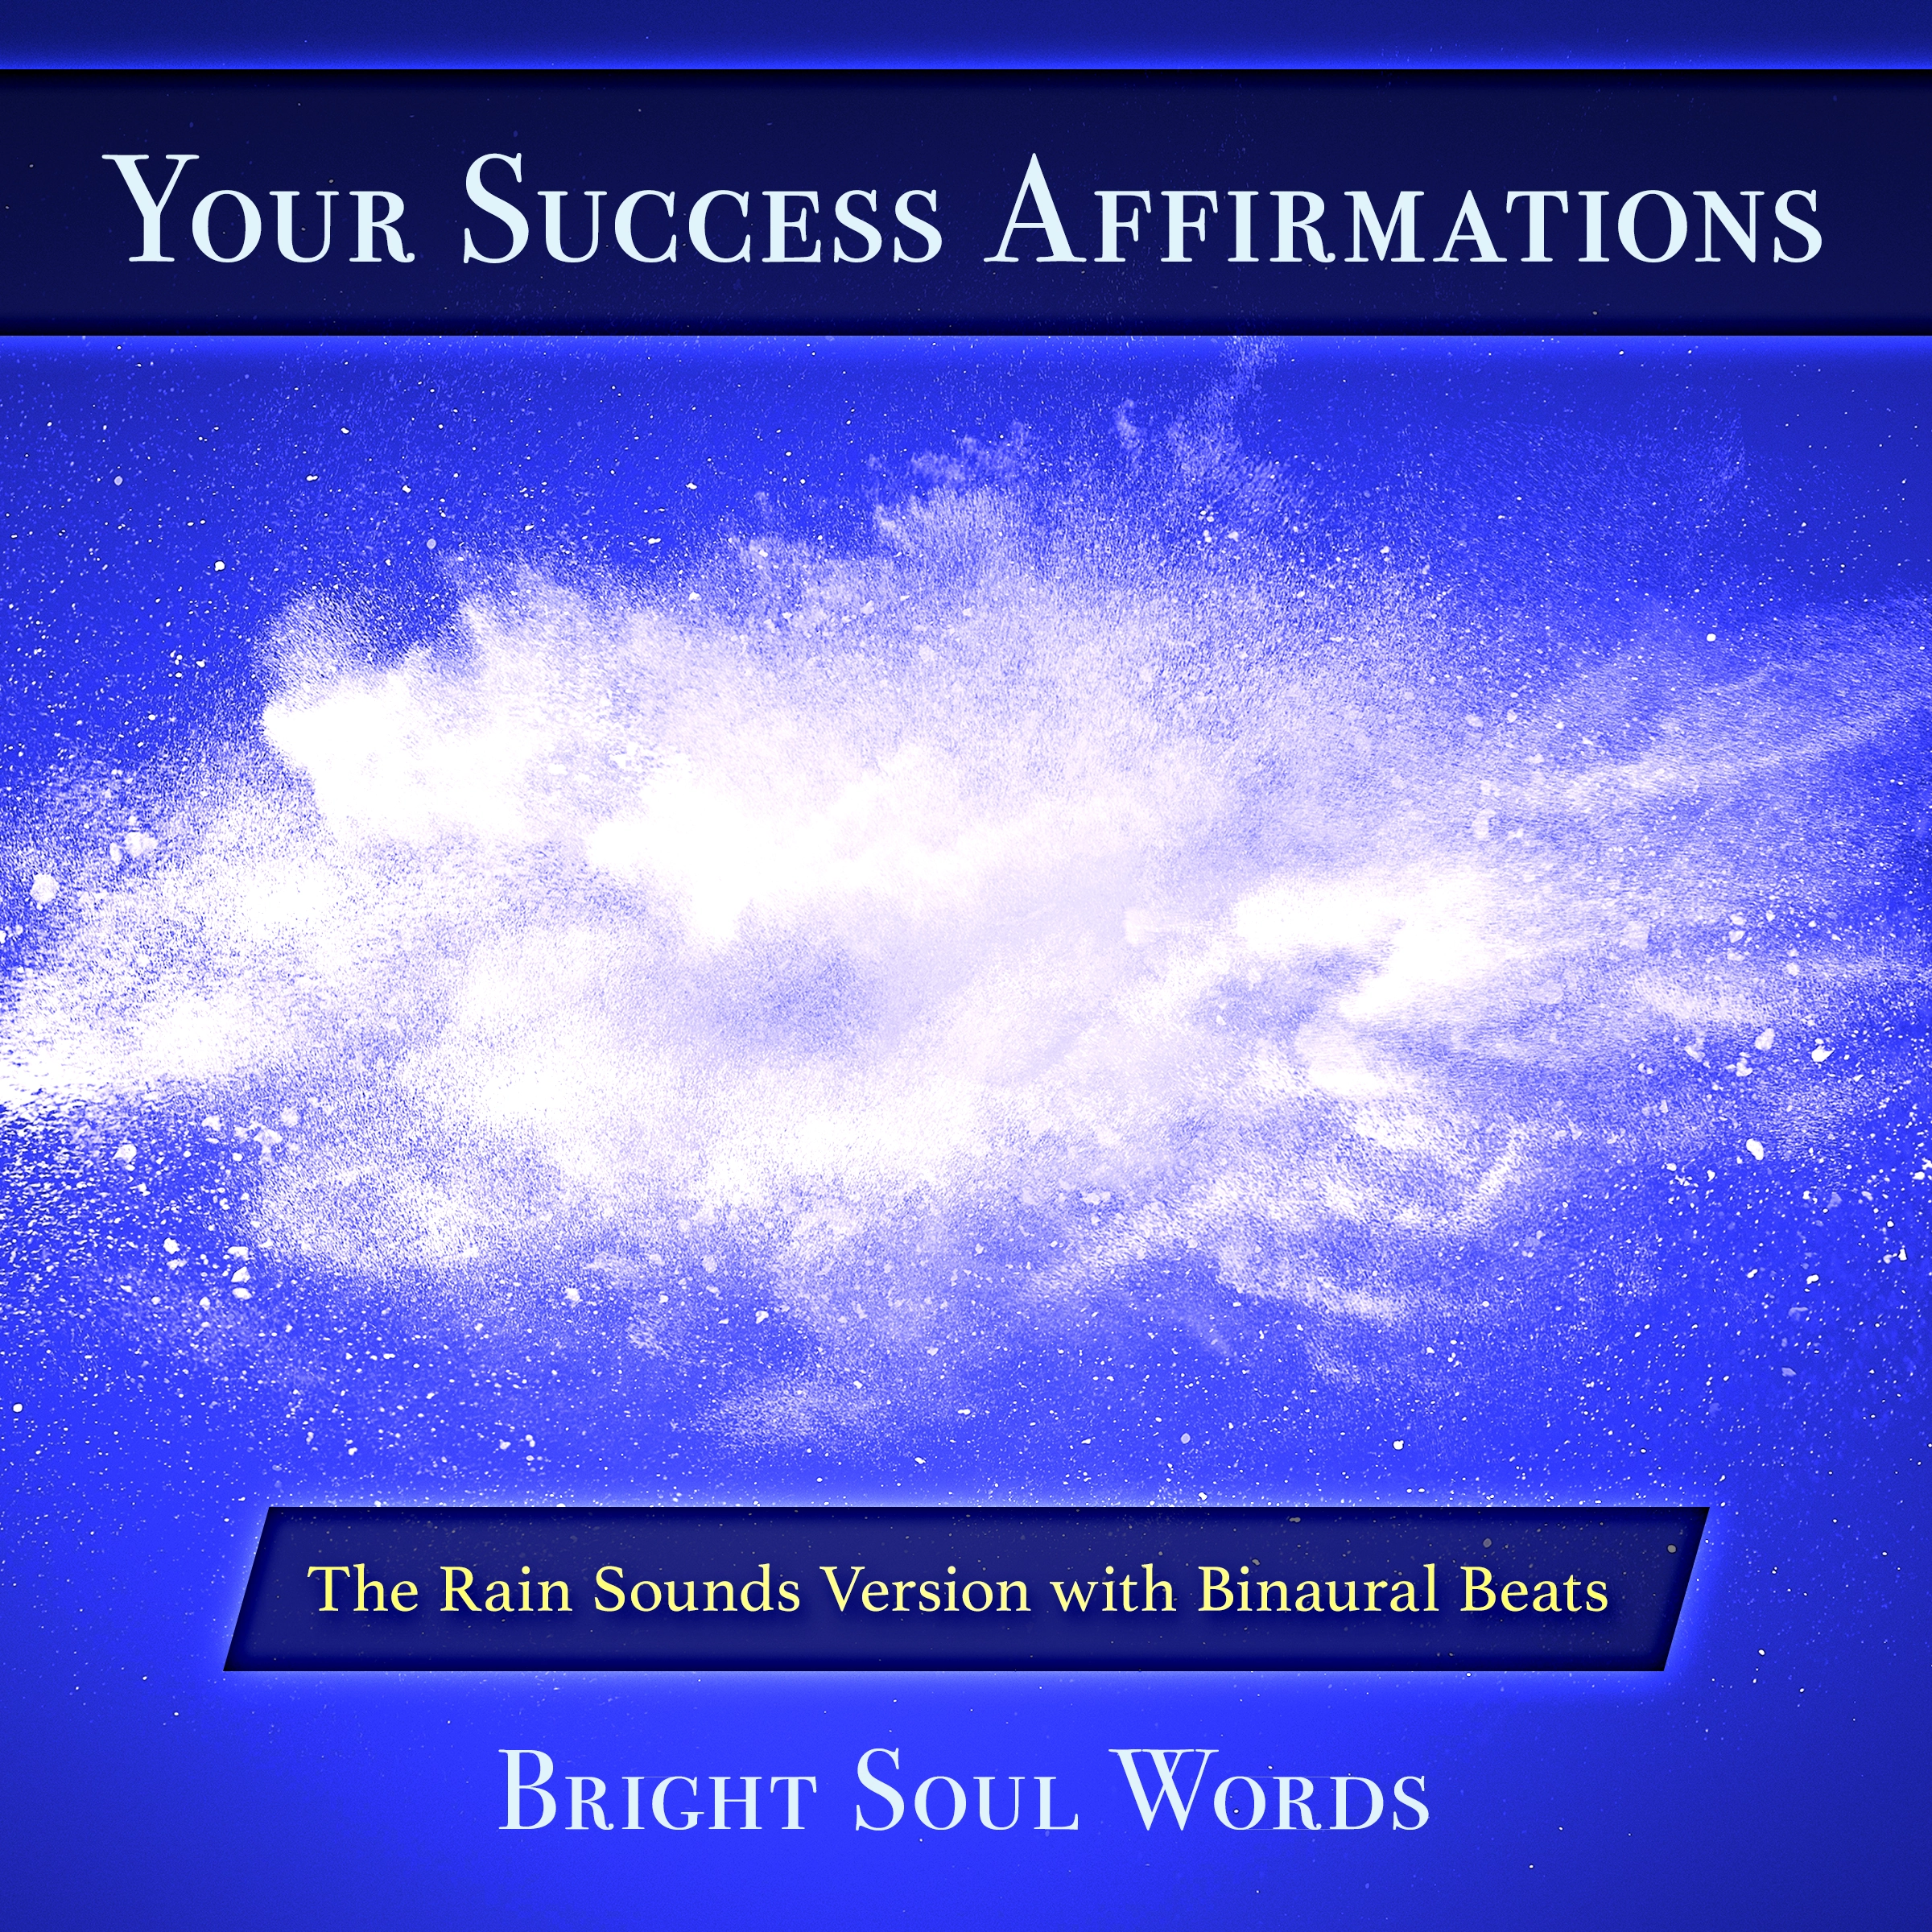 Your Success Affirmations: The Rain Sounds Version with Binaural Beats Audiobook by Bright Soul Words